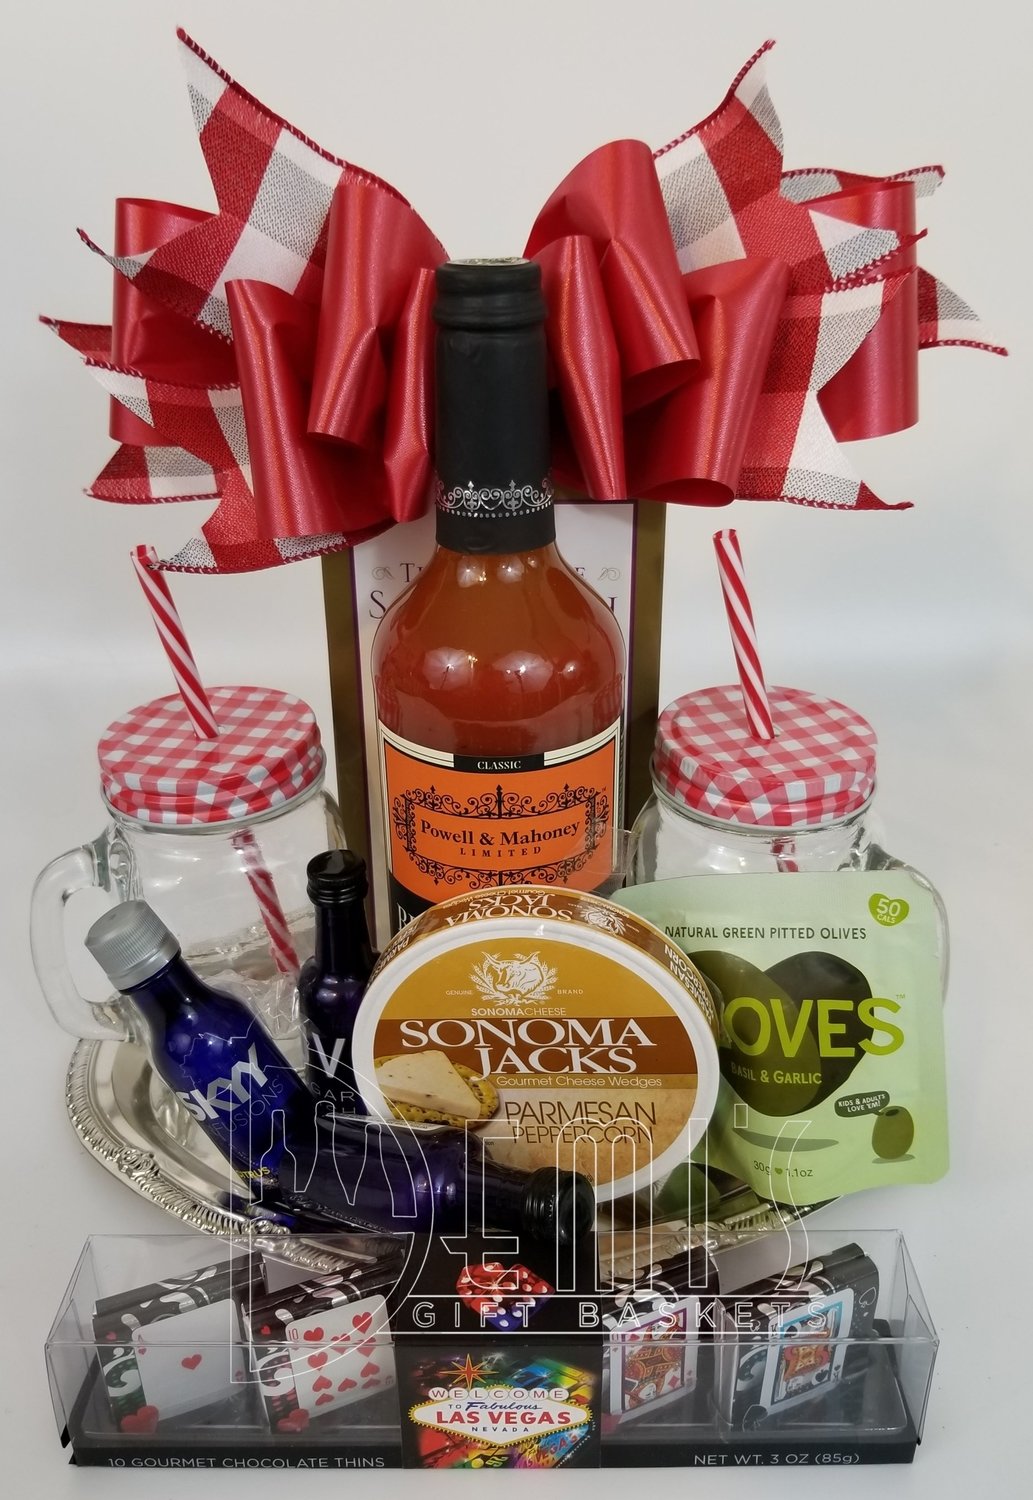 Bloody Mary Gift Basket Delivery : Alder Creek Bloody Mary Gift Basket ...